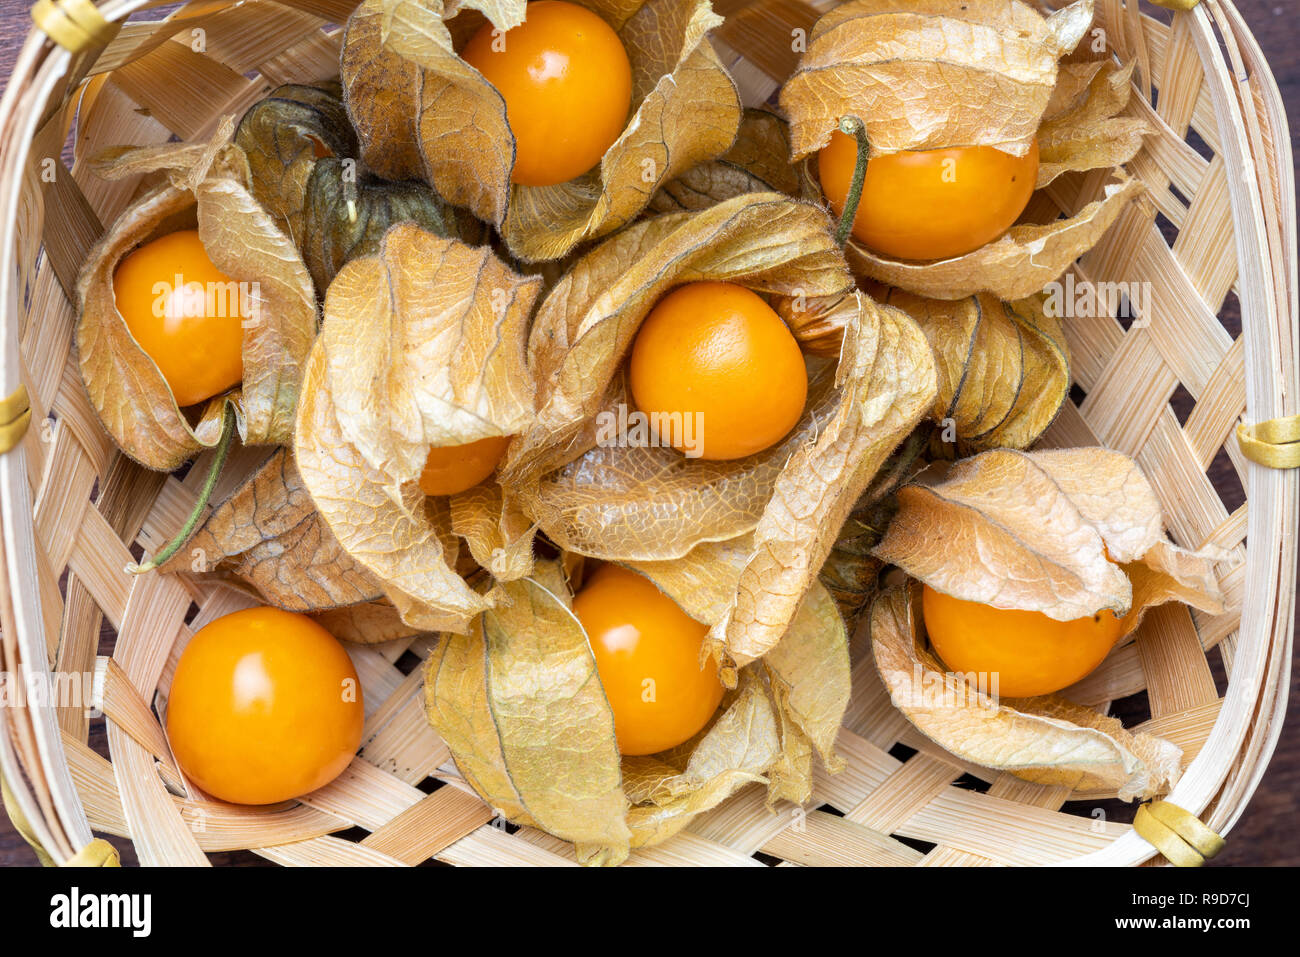 Basket with flowers and fruits of Fisalis (Physalis peruviana). Viewed from above. Stock Photo